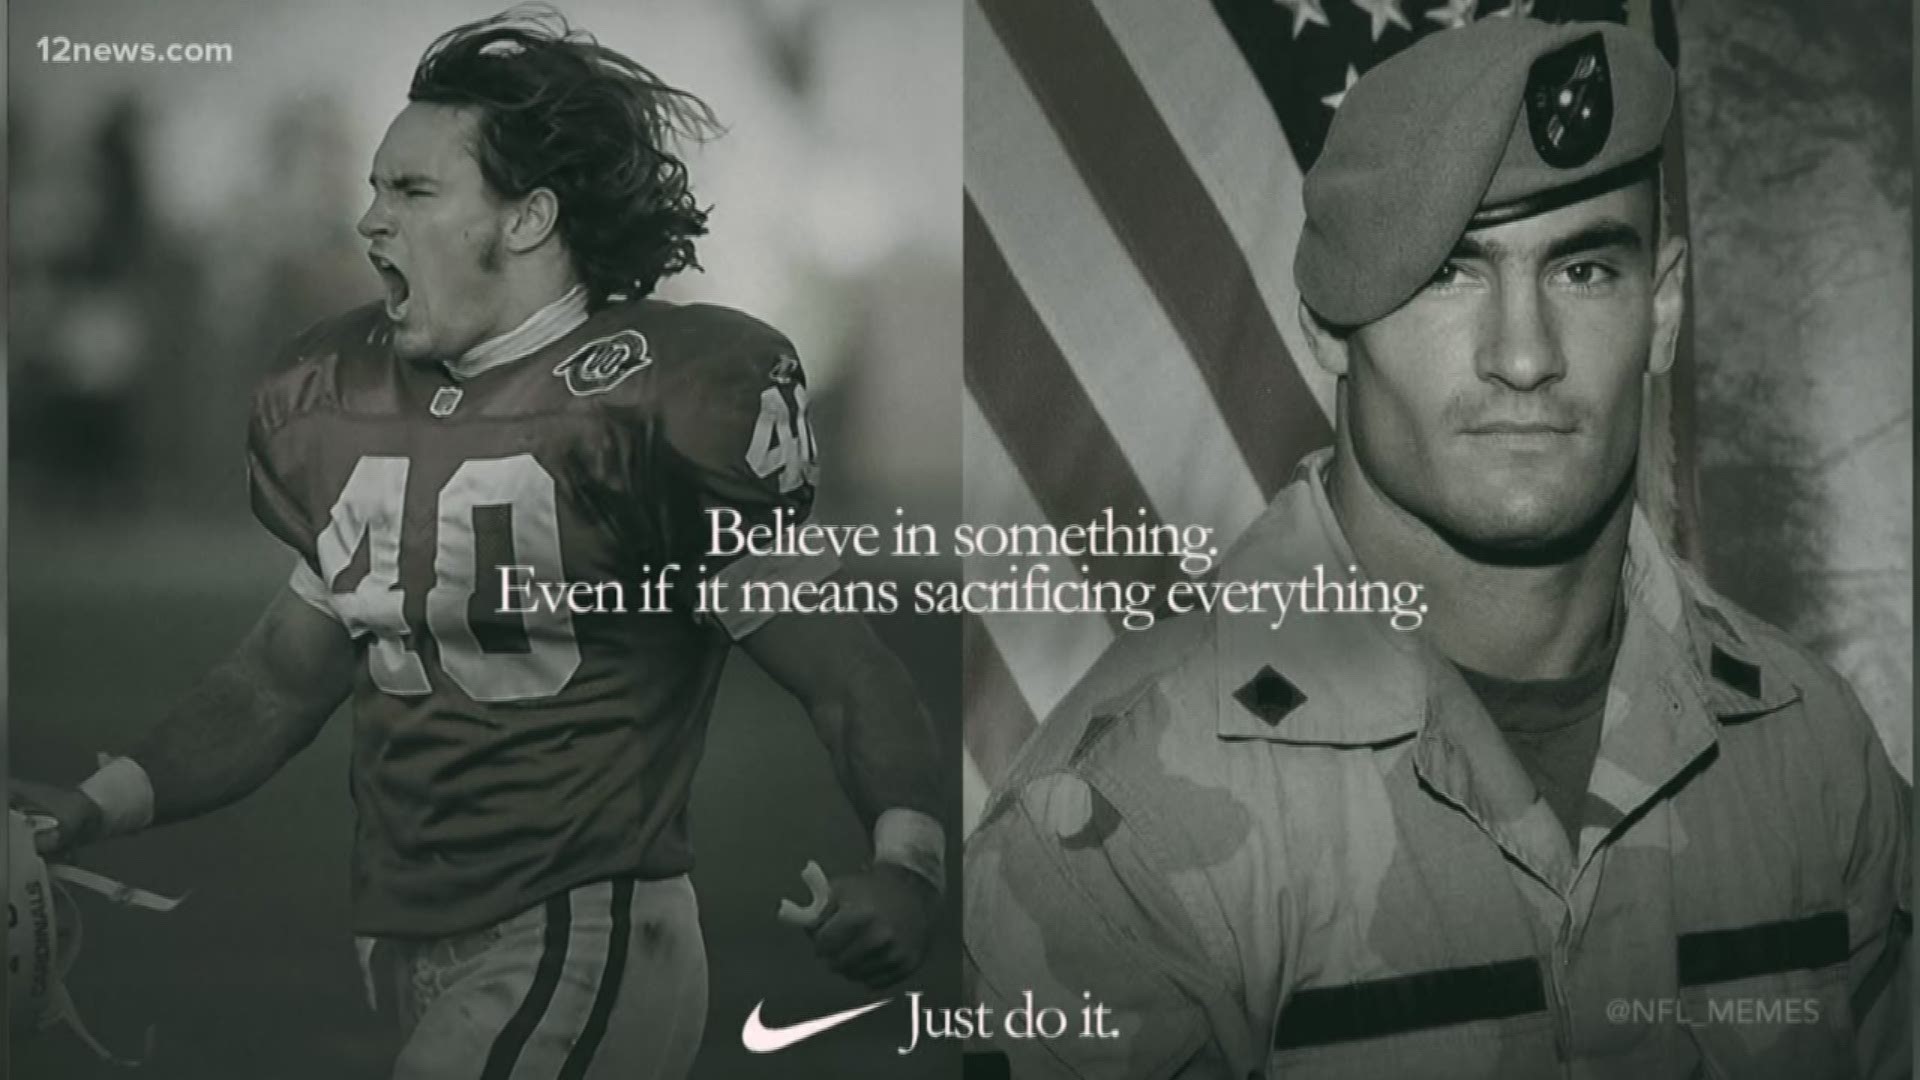 Nike released a controversial ad featuring Colin Kaepernick. Some were quick to use Pat Tillman's ultimate sacrifice to fire back at the ad. Friends and family of Tillman are saying don't use his name for a political agenda.